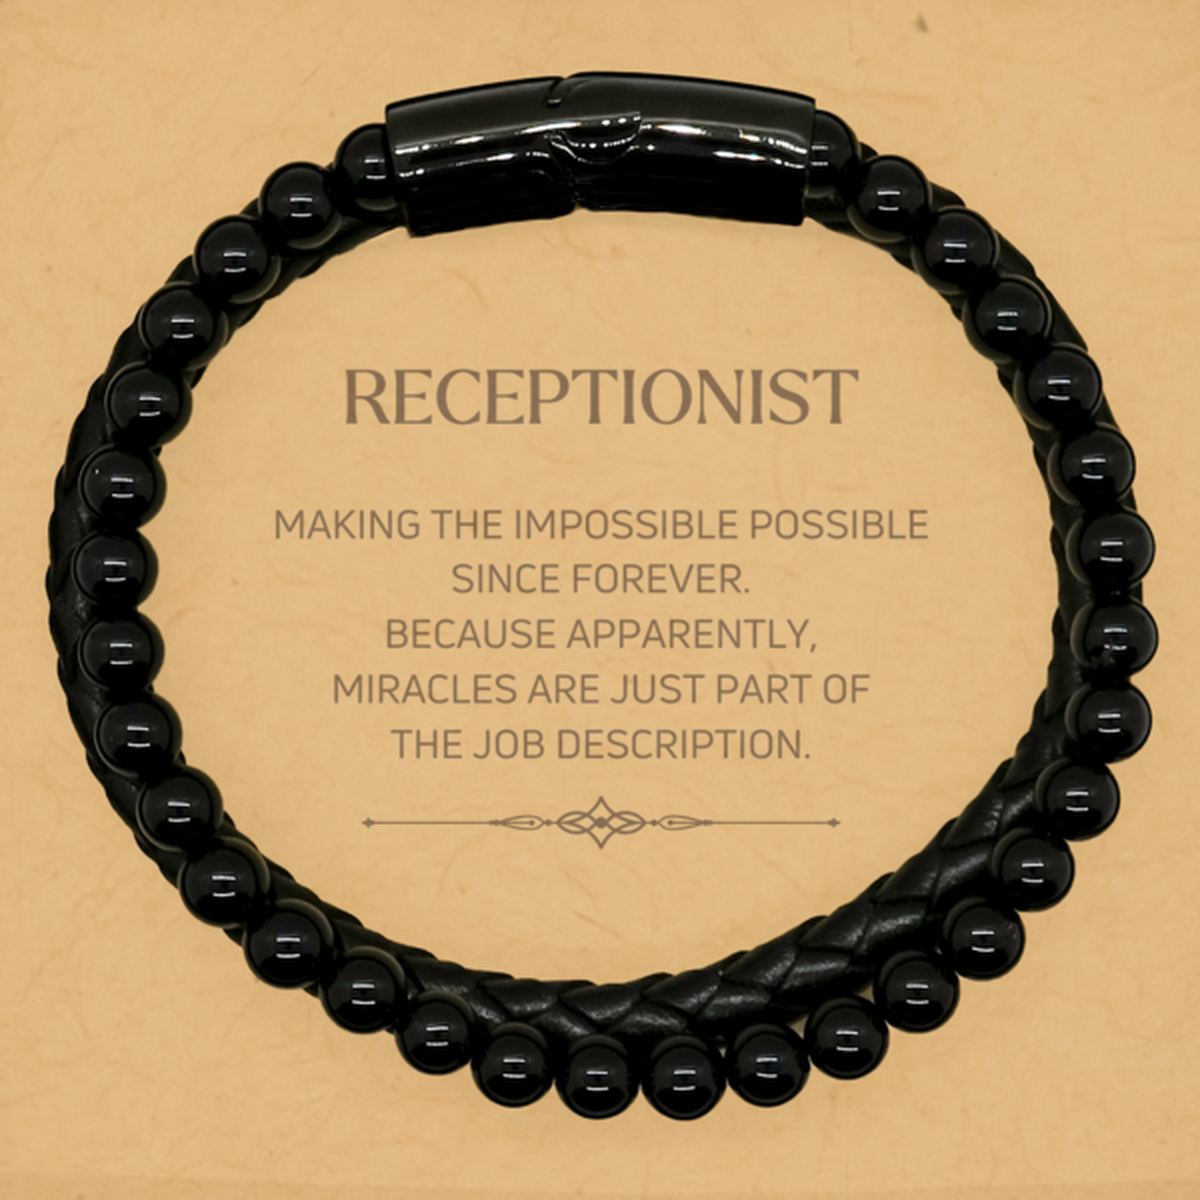 Funny Receptionist Gifts, Miracles are just part of the job description, Inspirational Birthday Stone Leather Bracelets For Receptionist, Men, Women, Coworkers, Friends, Boss